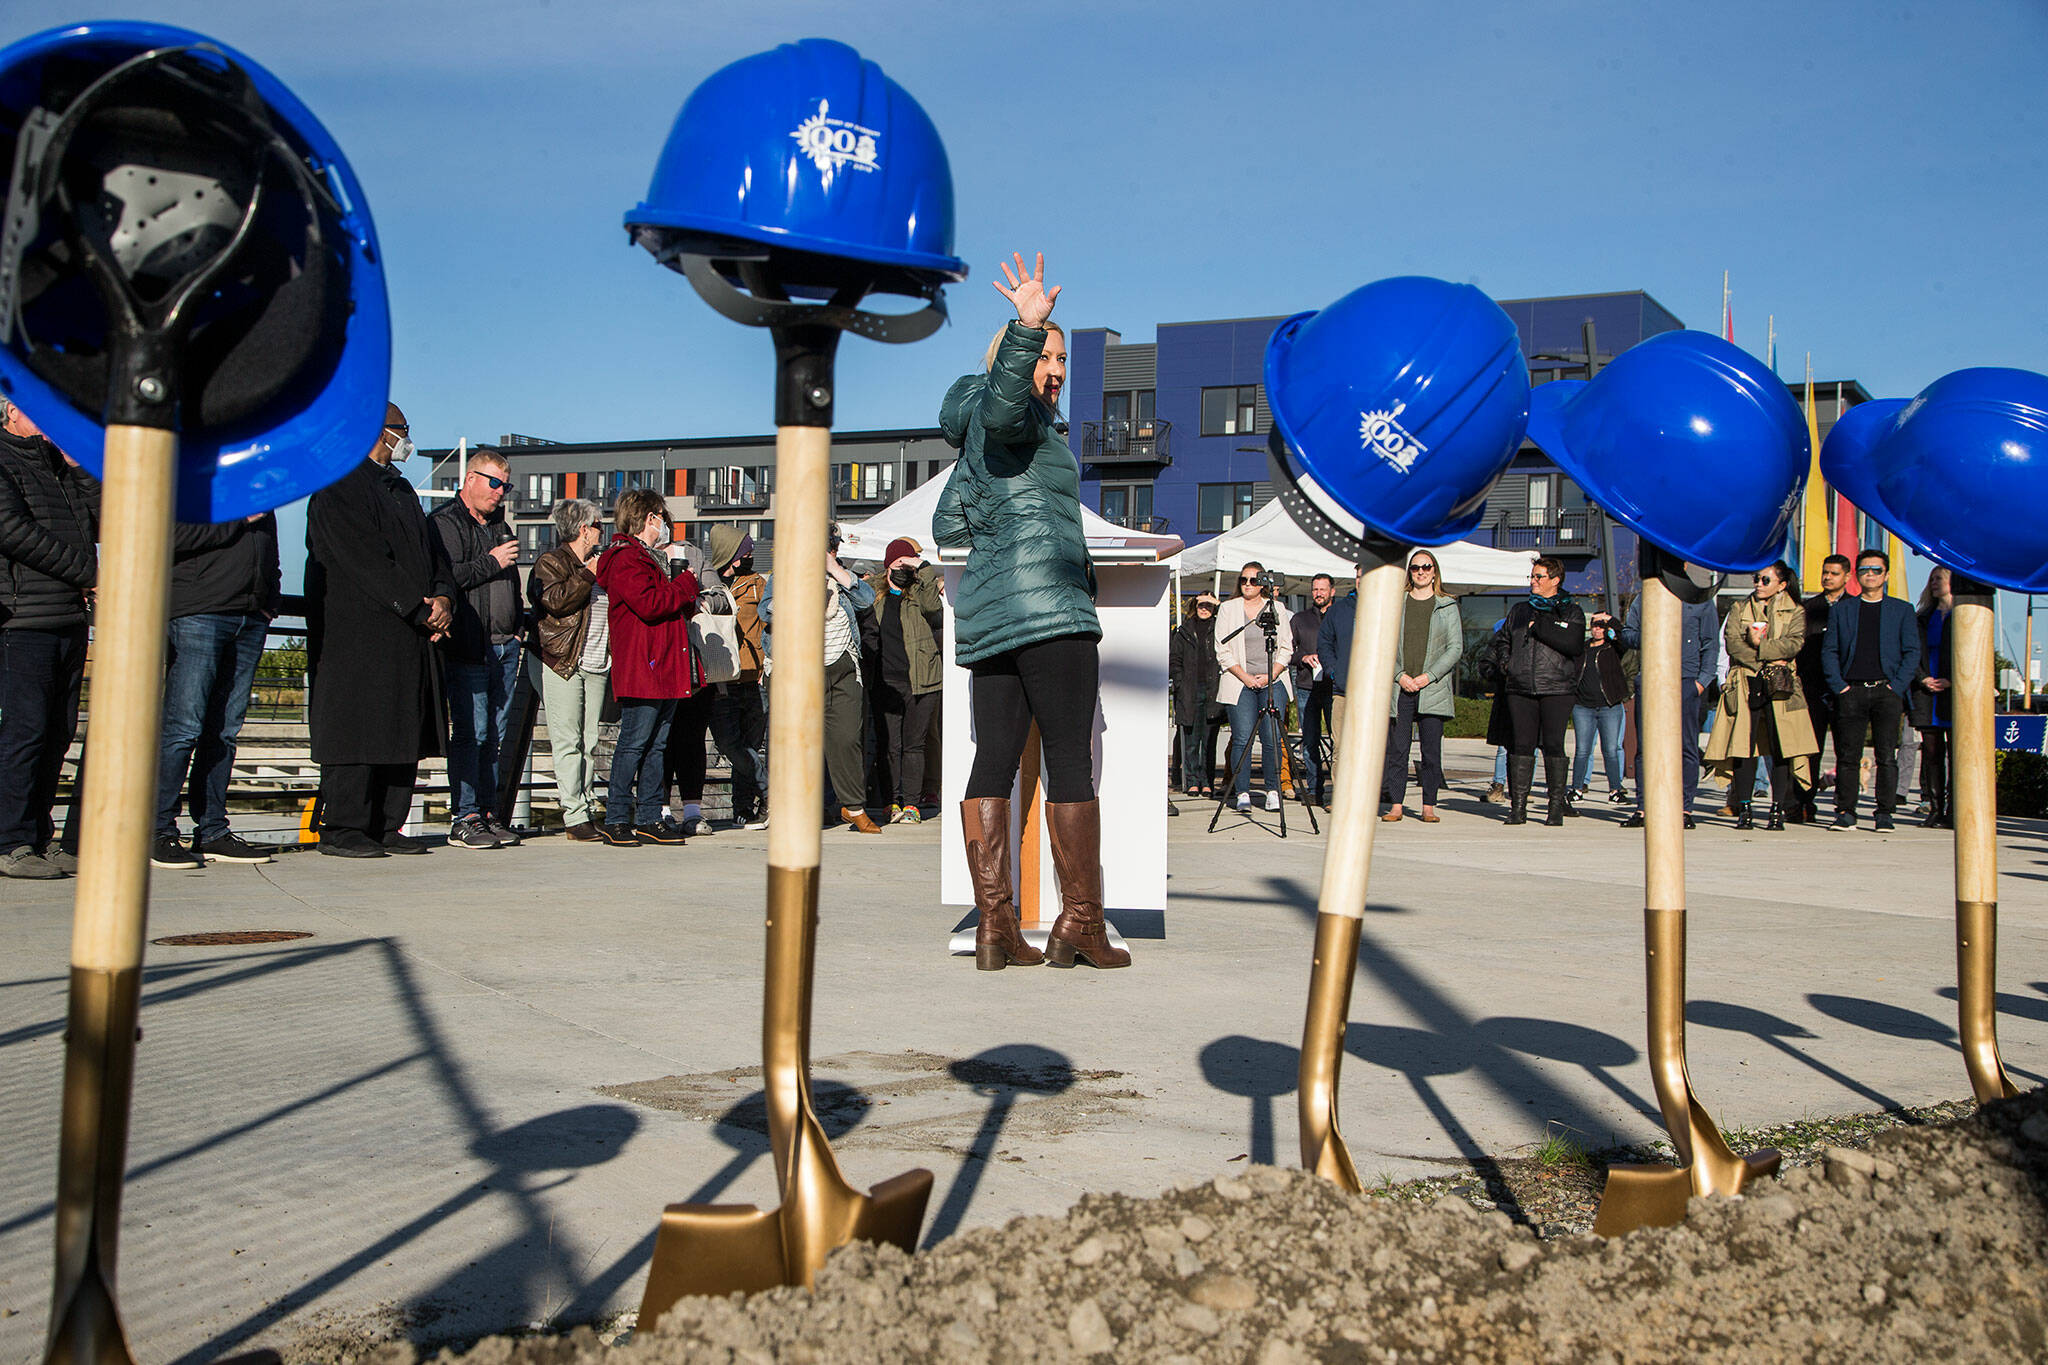 During a groundbreaking ceremony Monday, Port of Everett CEO Lisa Lefeber gestures toward the site of new food and retail establishments that will rise at Fisherman’s Harbor at Waterfront Place. (Andy Bronson / The Herald)